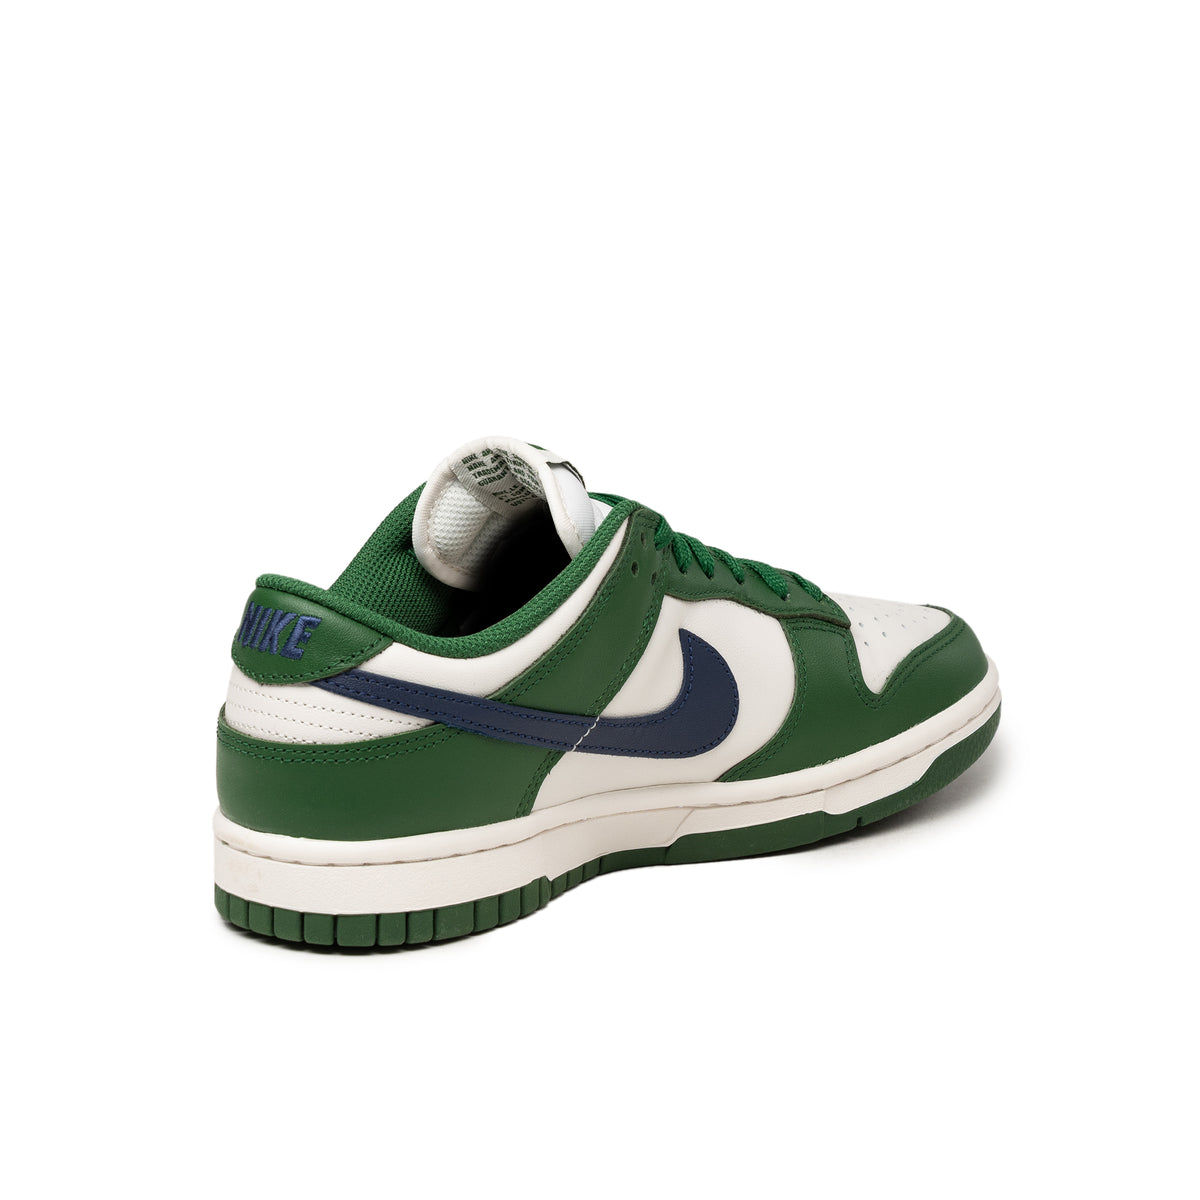 Cop the Photon Dust Malachite Nike tage Air Force 1 Shadow using